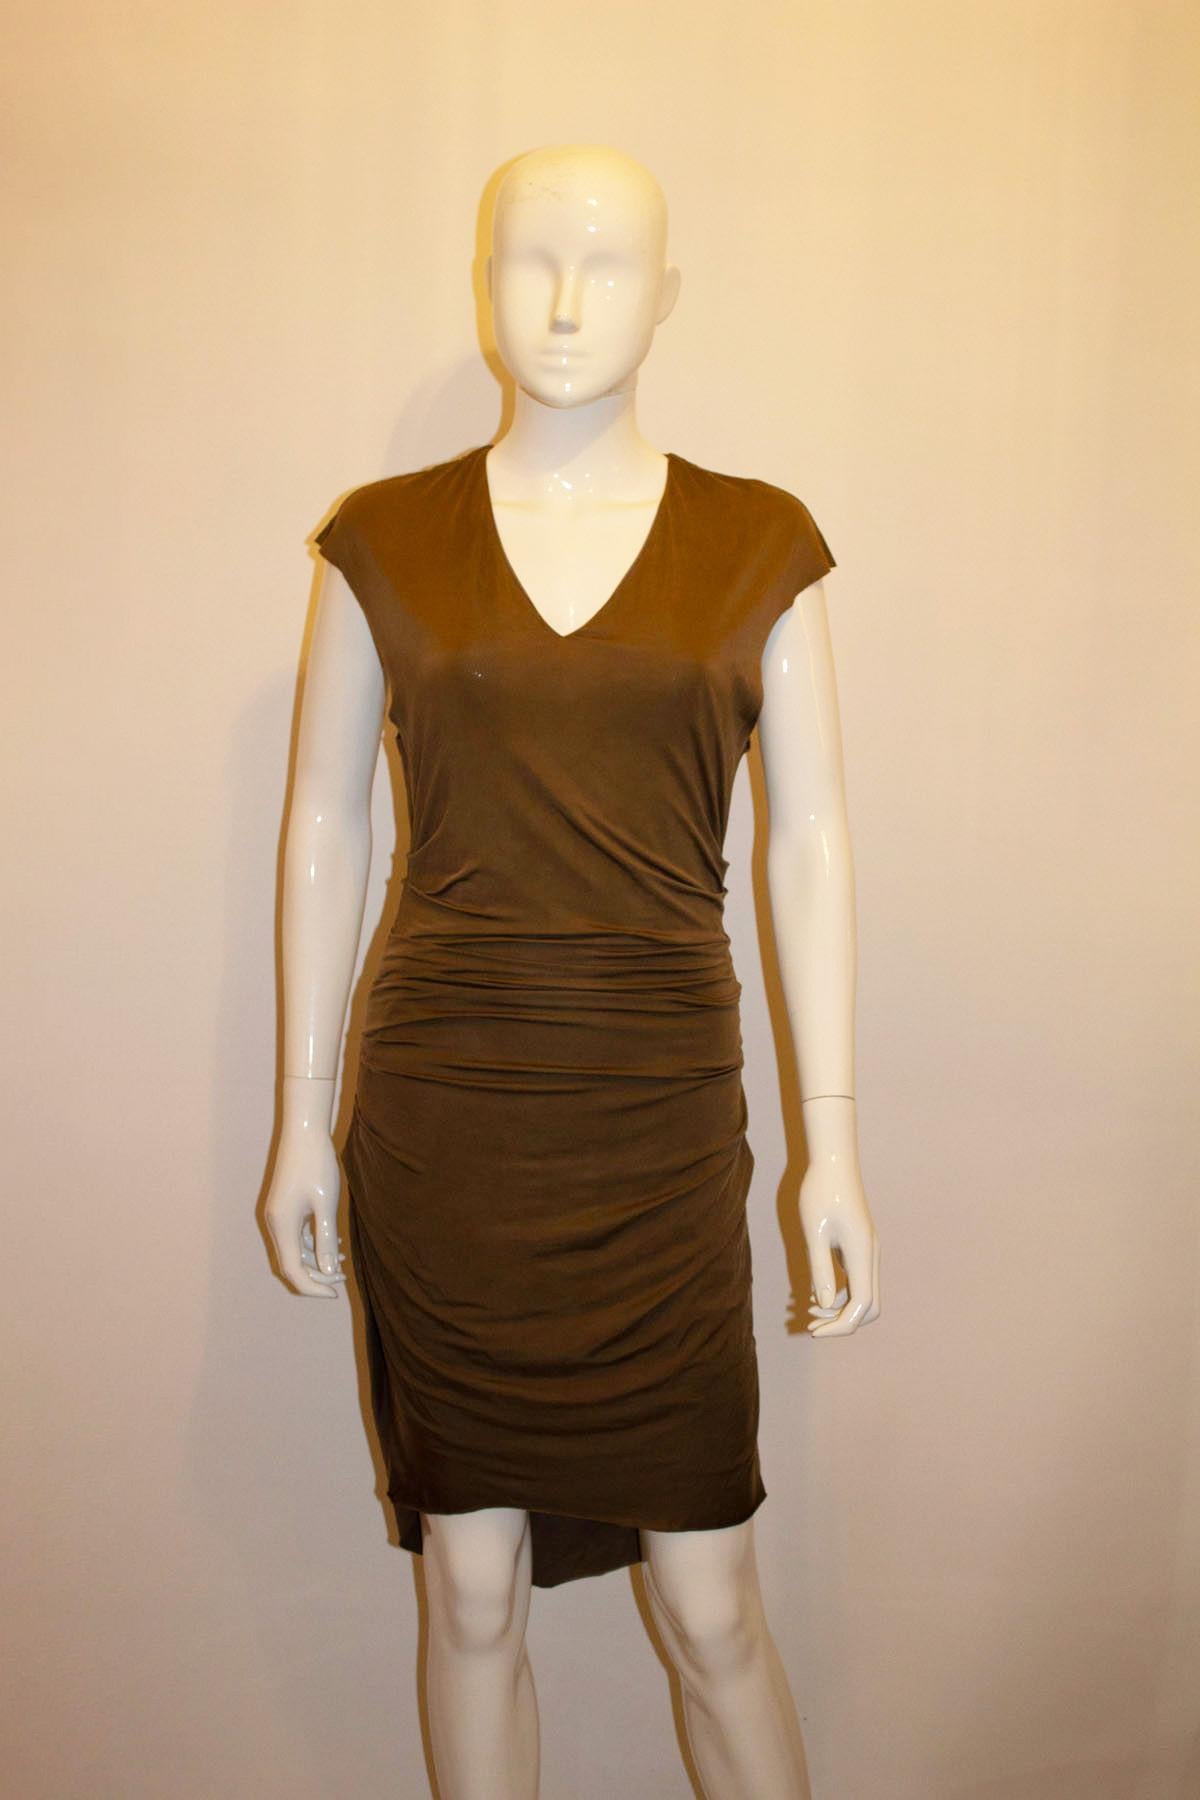 A chic and easy to wear cocktail dress by Helmut Lang. The sleaveless dress has a v neckline with gathering on both sides. The dress is lined and pops over the head. Made in the USA. Size S
Measurements Bust up to 36'', length 39'' front, 42''back.